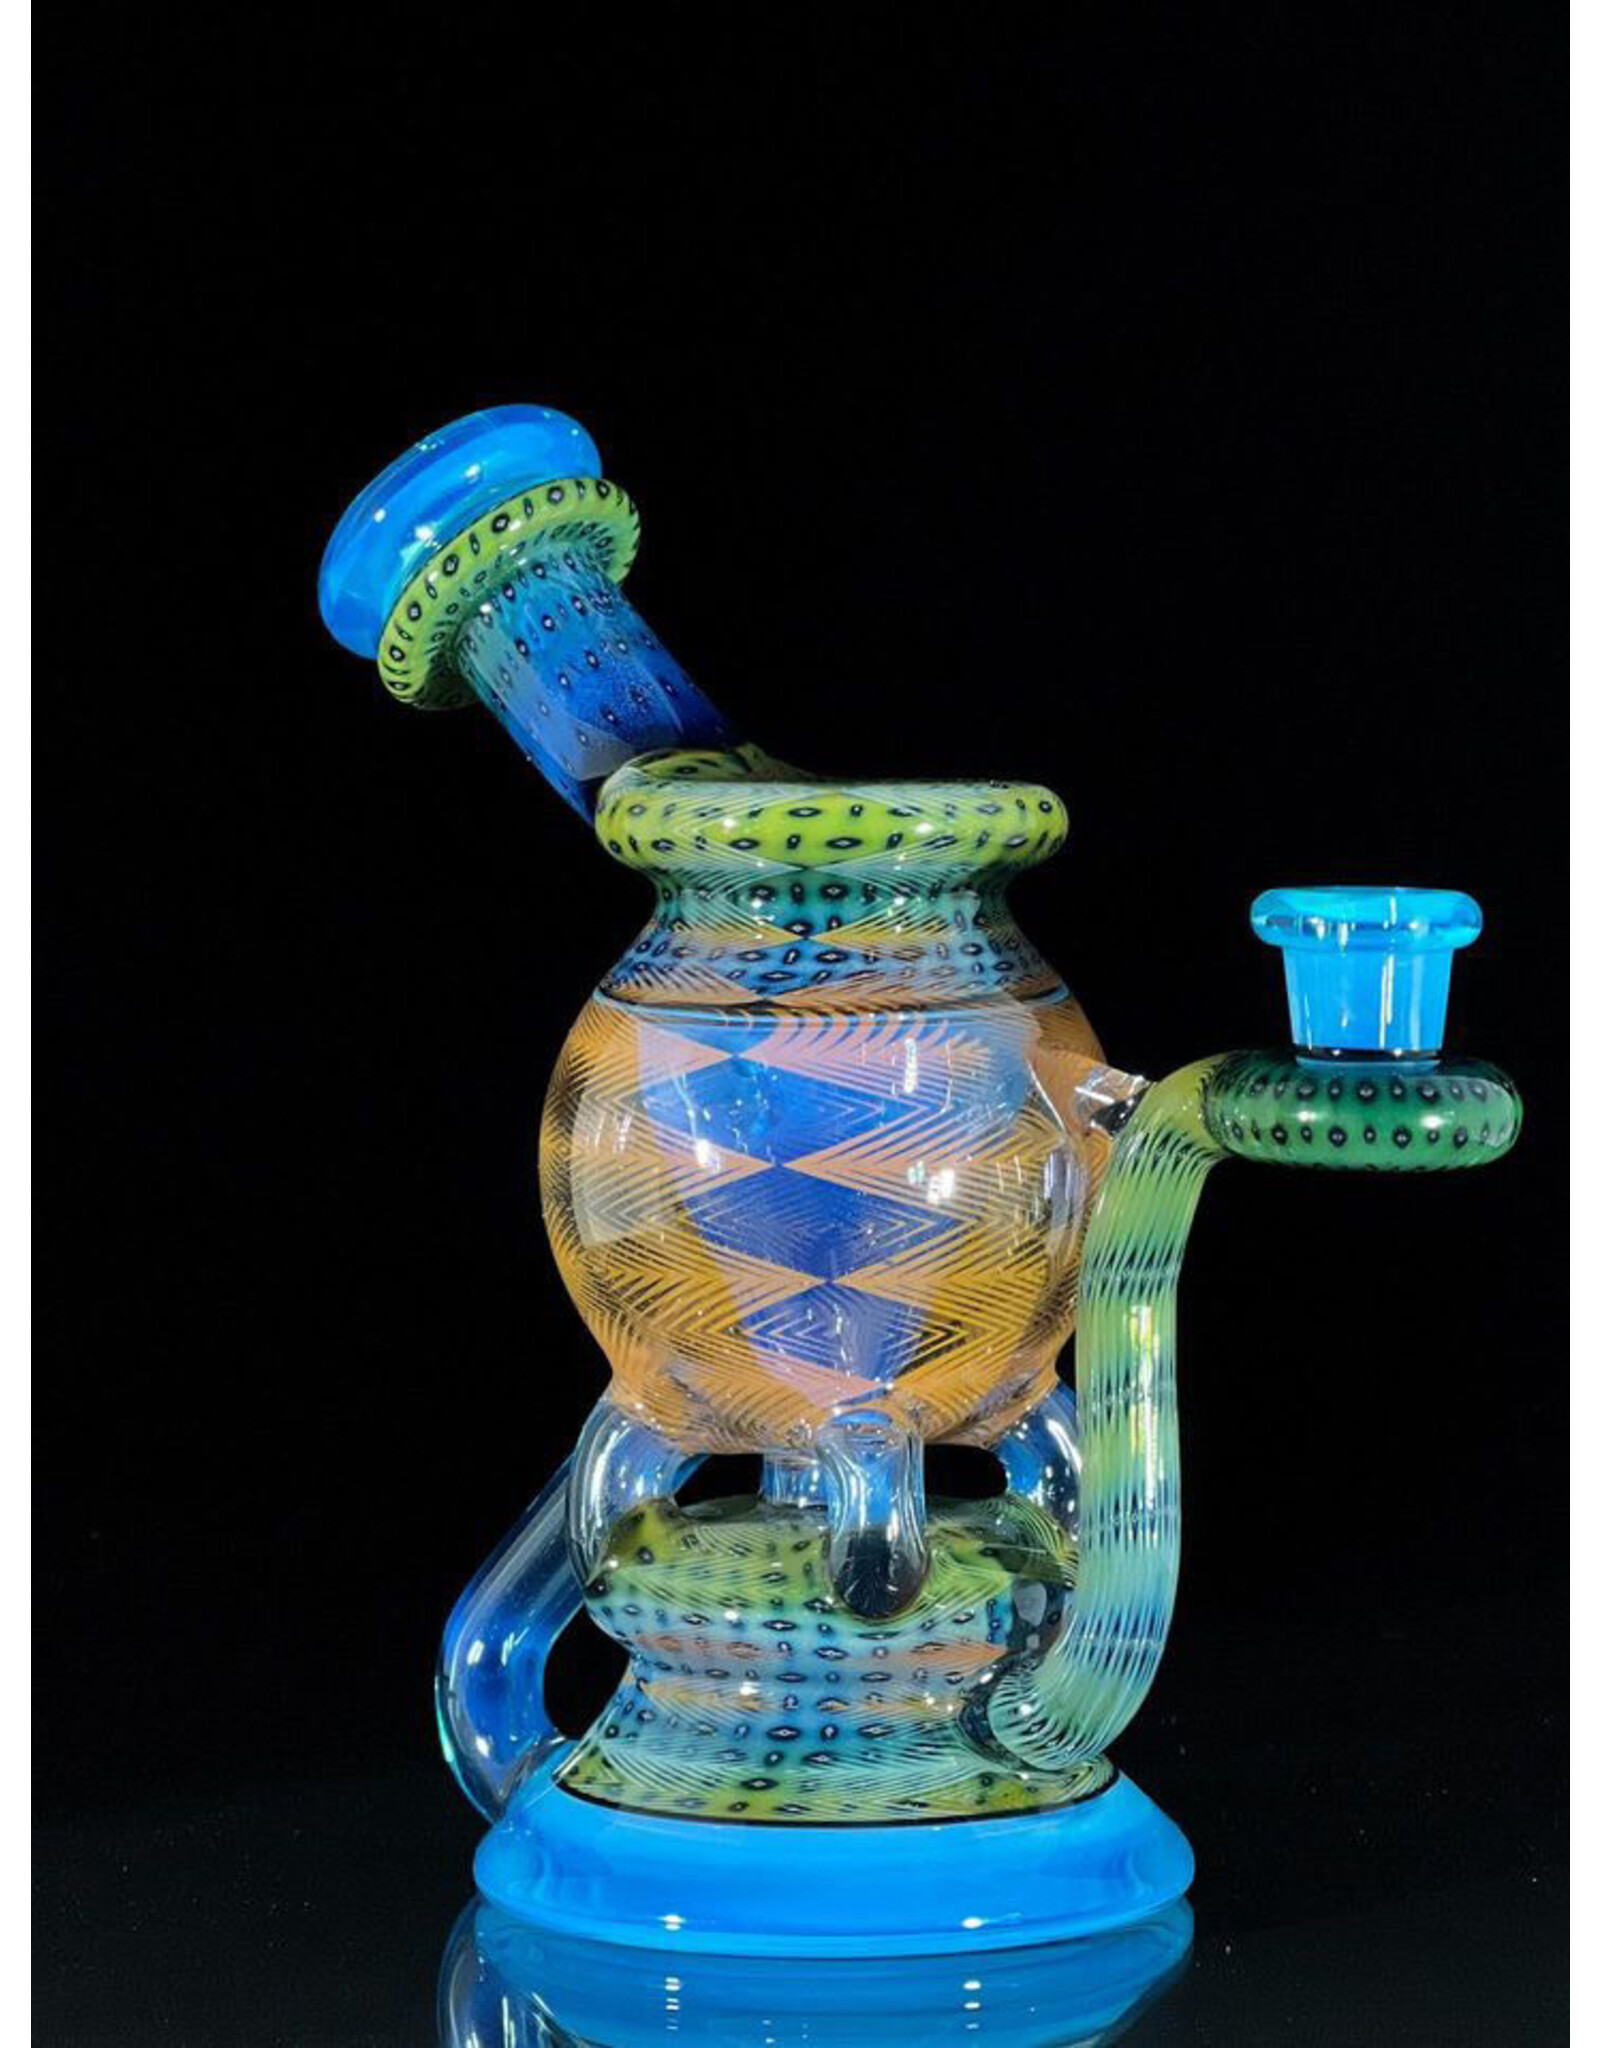 Sizelove Inside/Outside Recycler Metaterrania